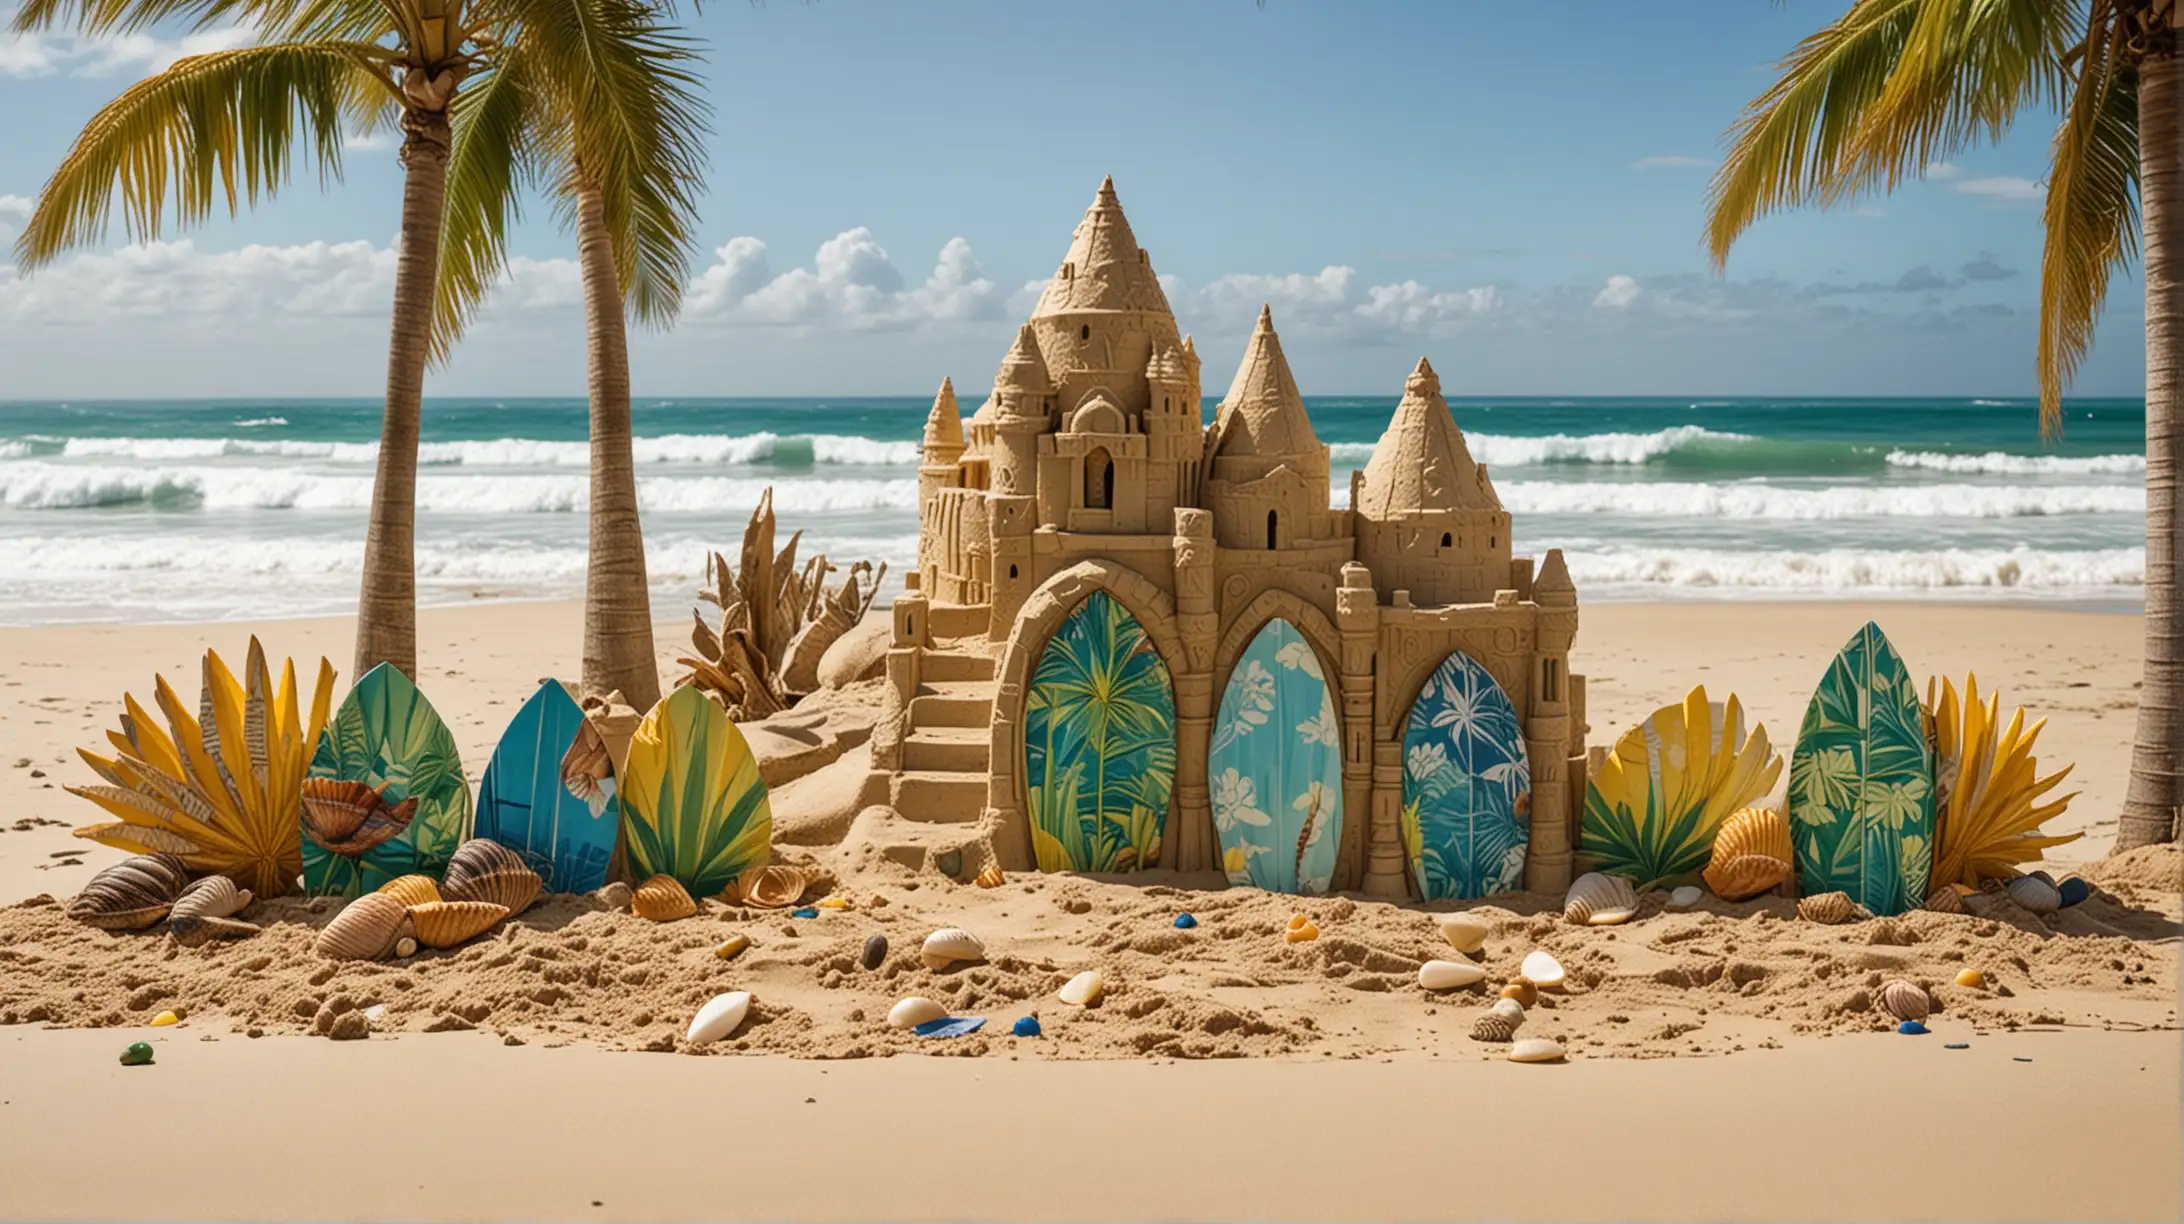 Sunshades and surf boards yellow, green, and blue. An ocean in the background and thick, palm leaves. With a fun sand castle and sea shells.